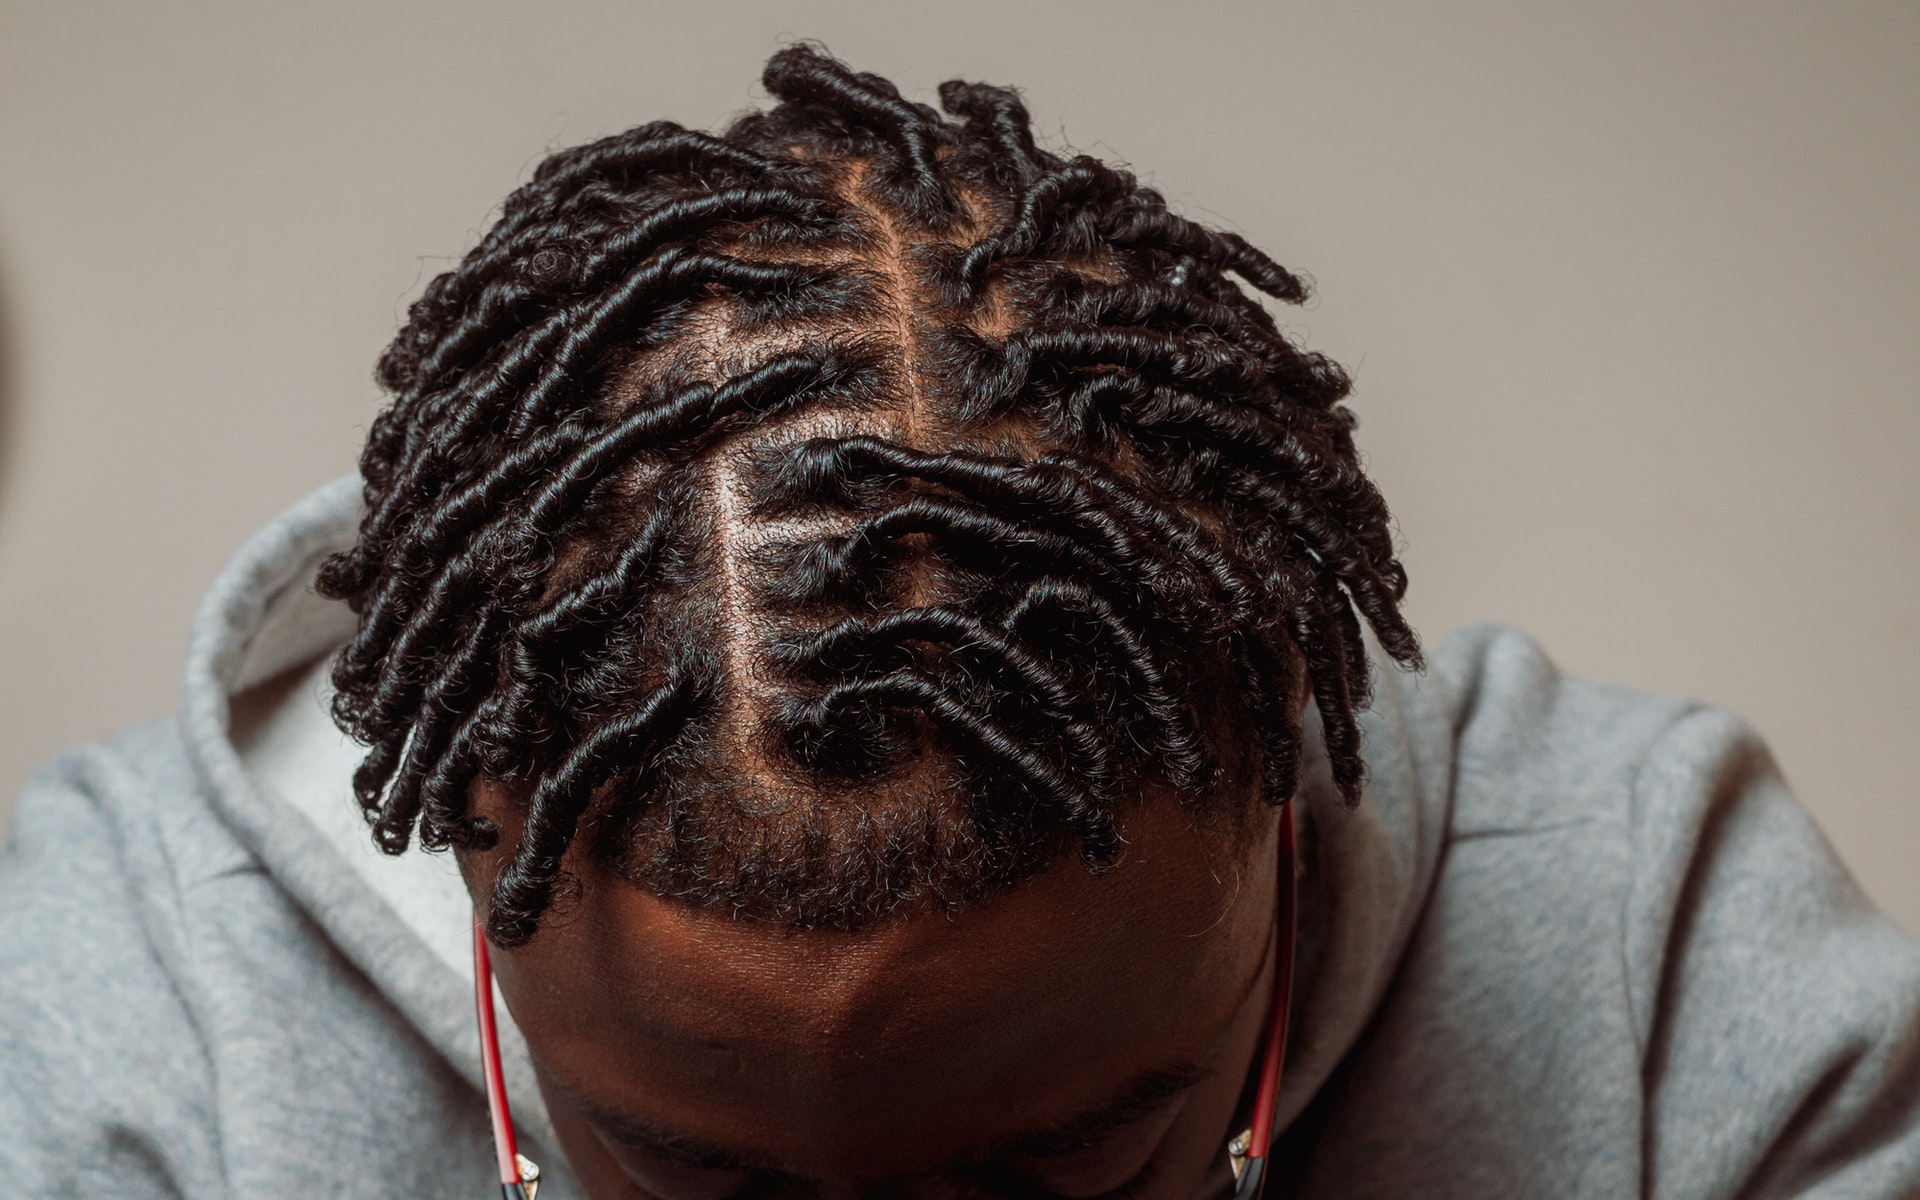 10 Starter Locs Questions answered